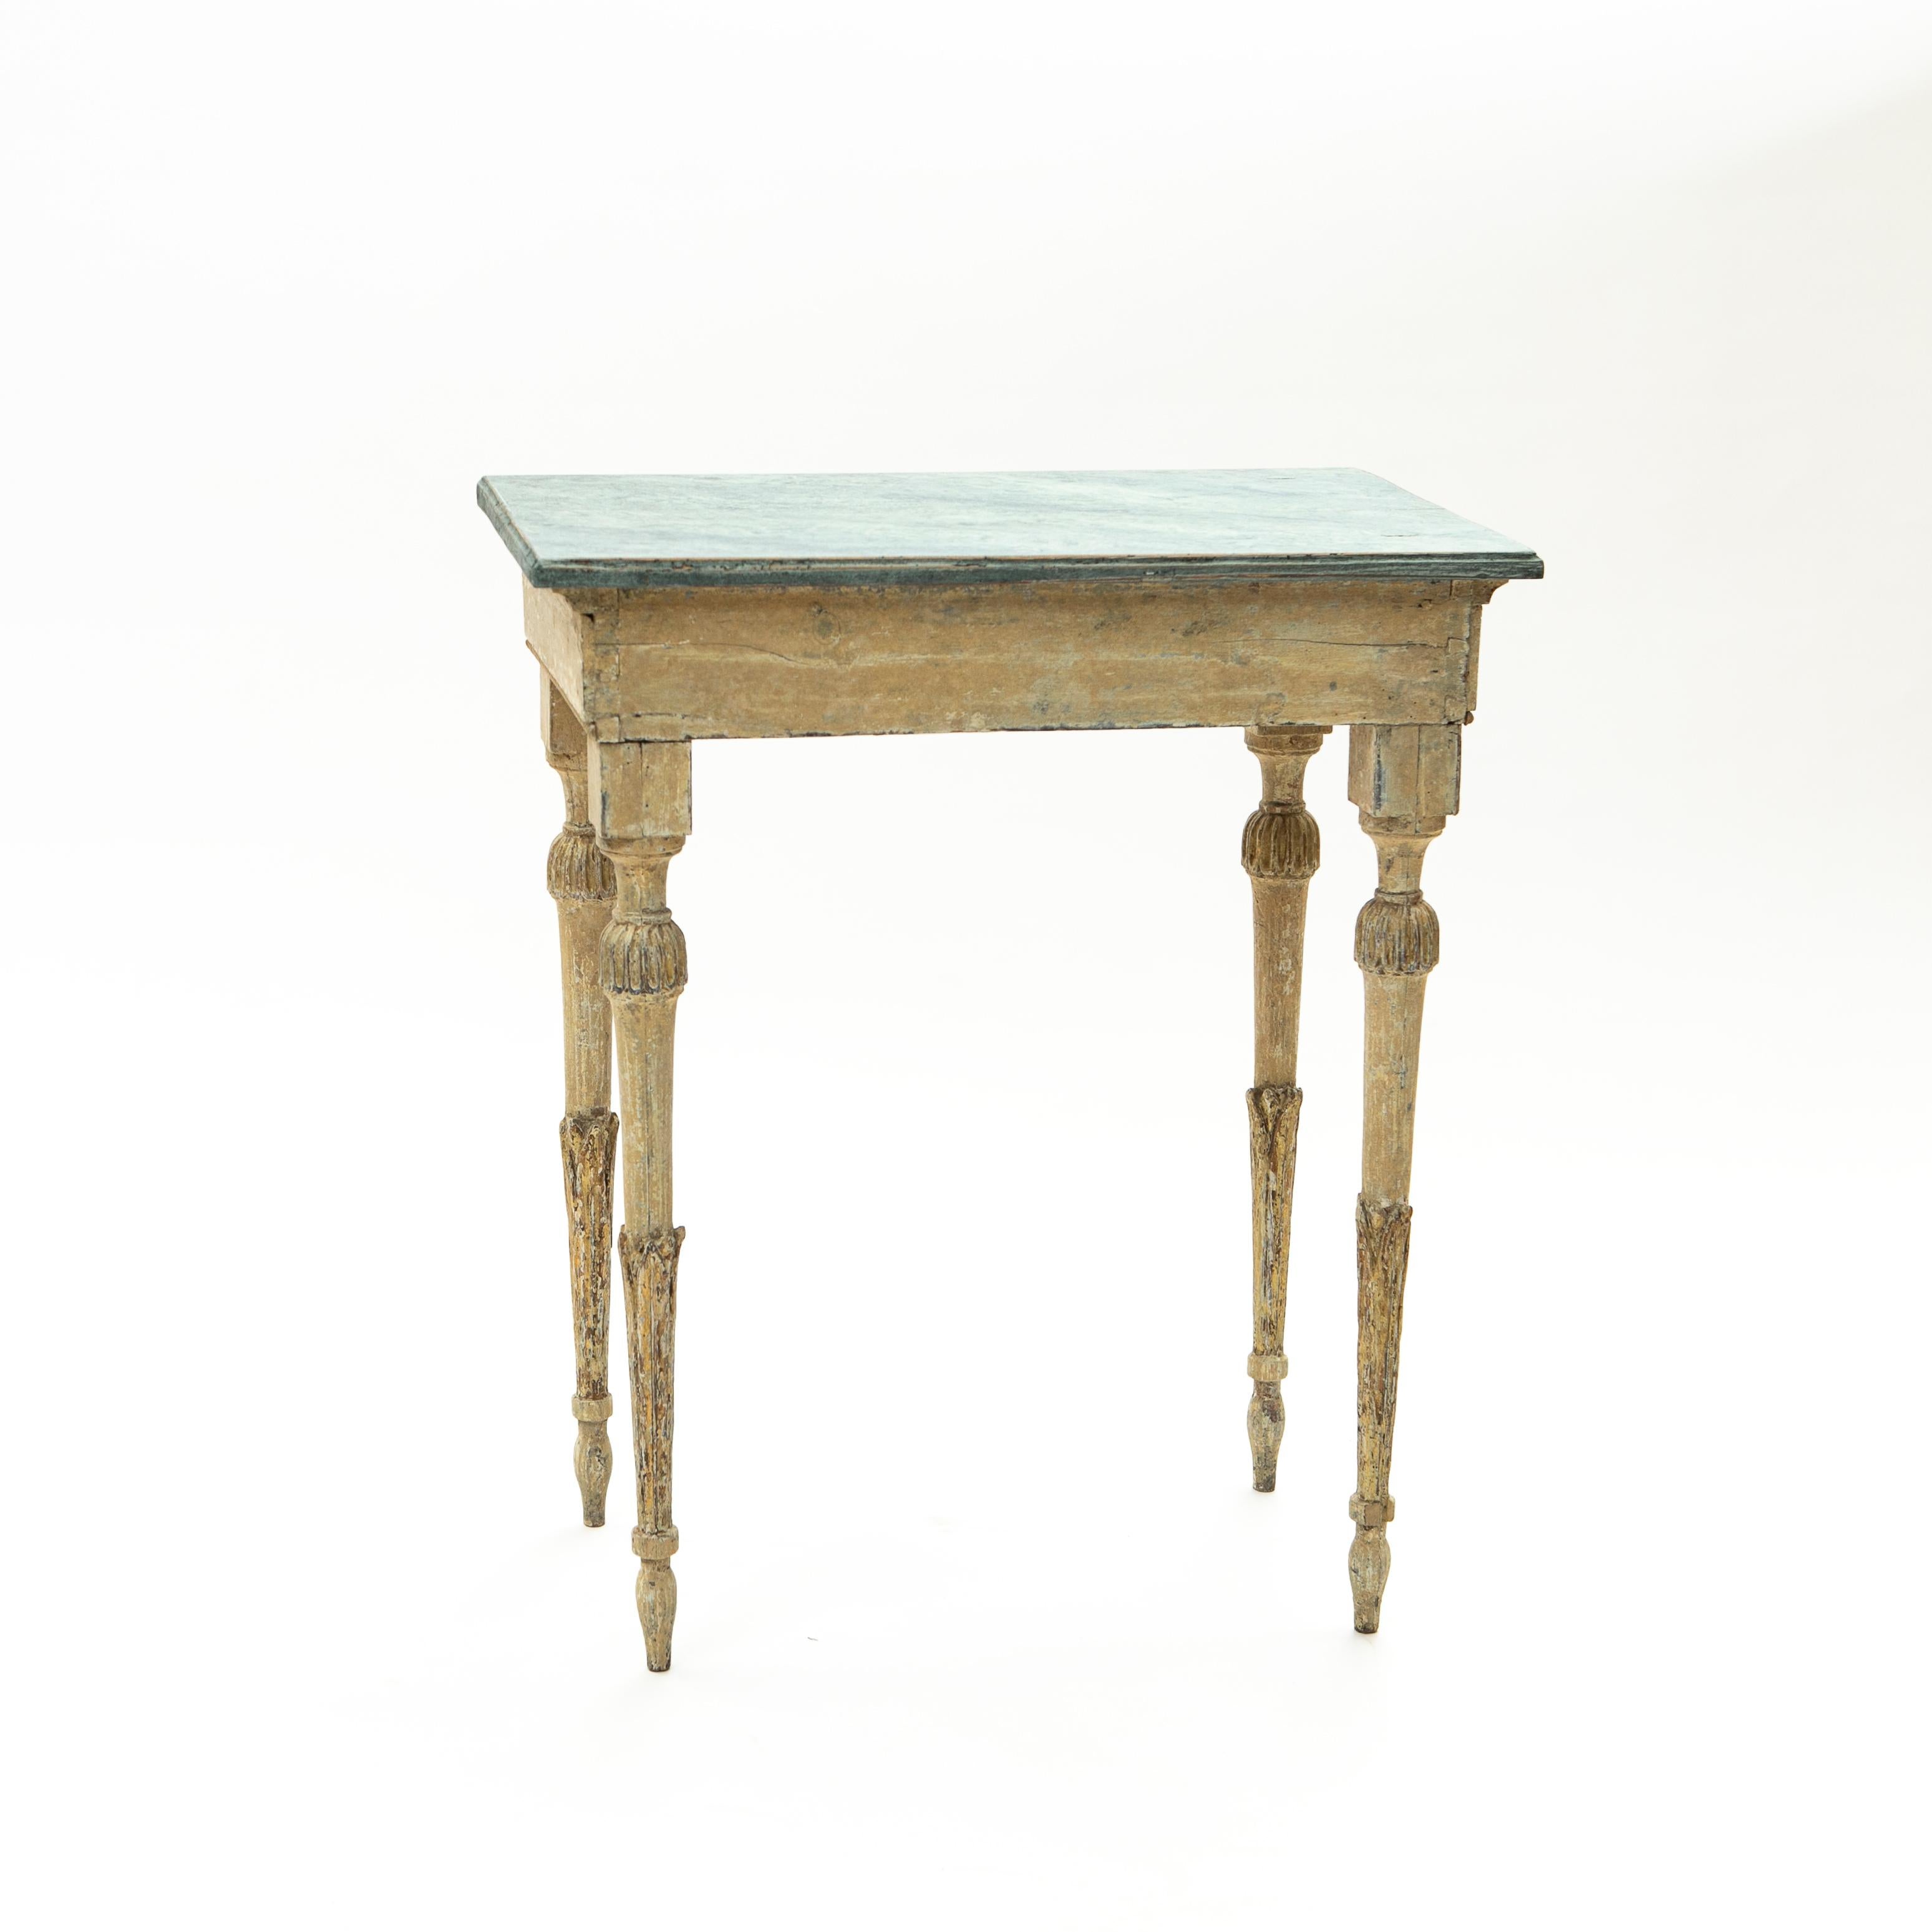 Wood Antique Gustavian Console Table